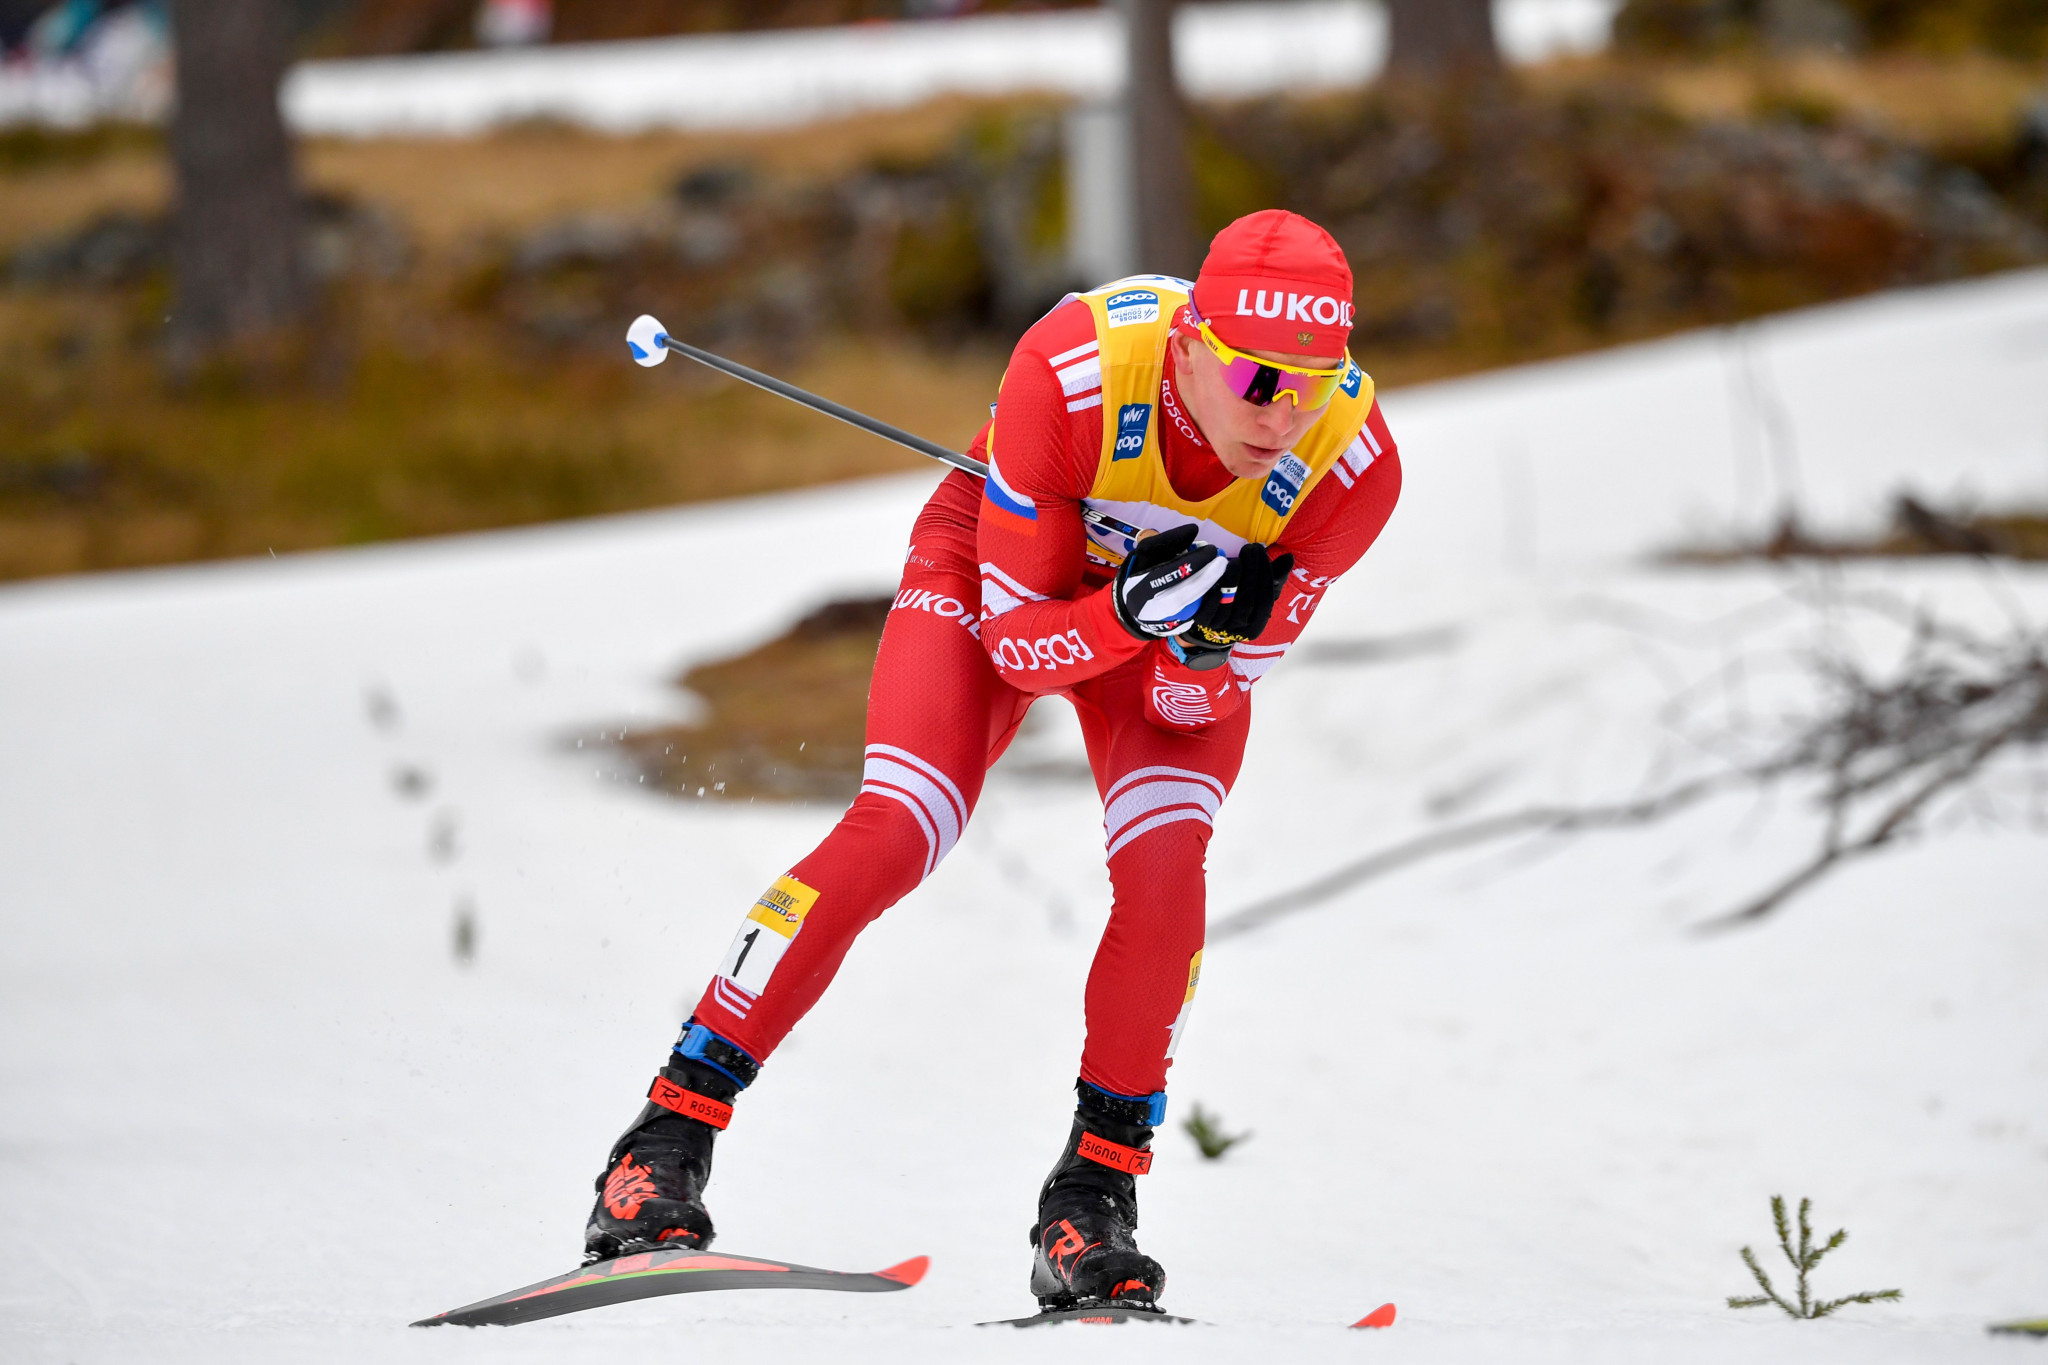 Alexander Bolshunov could take a step closer to winning the overall men's World Cup title ©Getty Images